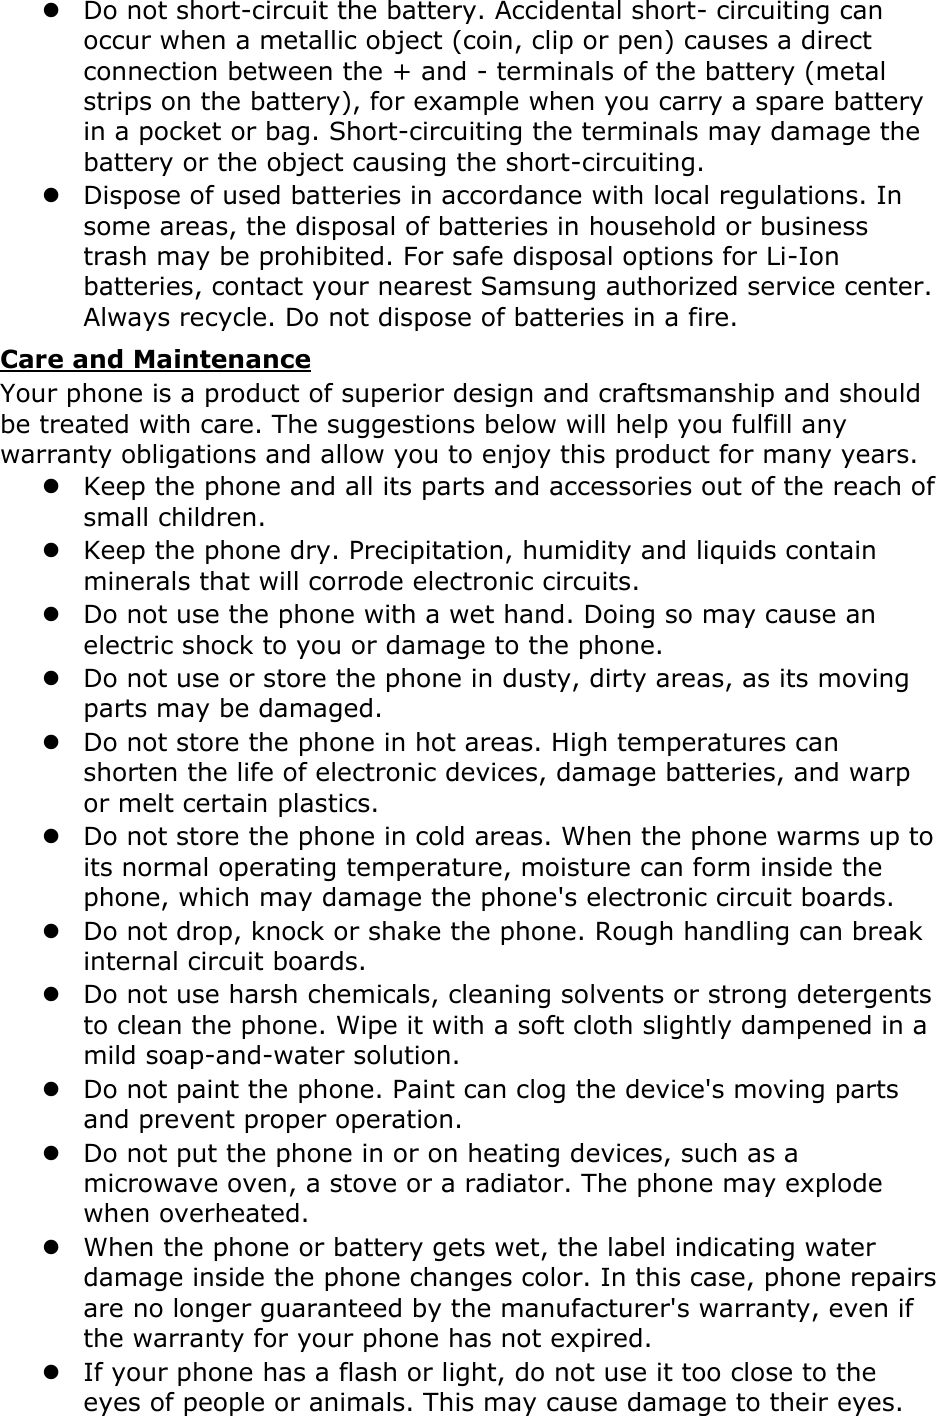 Page 20 of Samsung Electronics Co SCHI405U Portable Handset with Multi-band CDMA/LTE, WLAN and Bluetooth User Manual